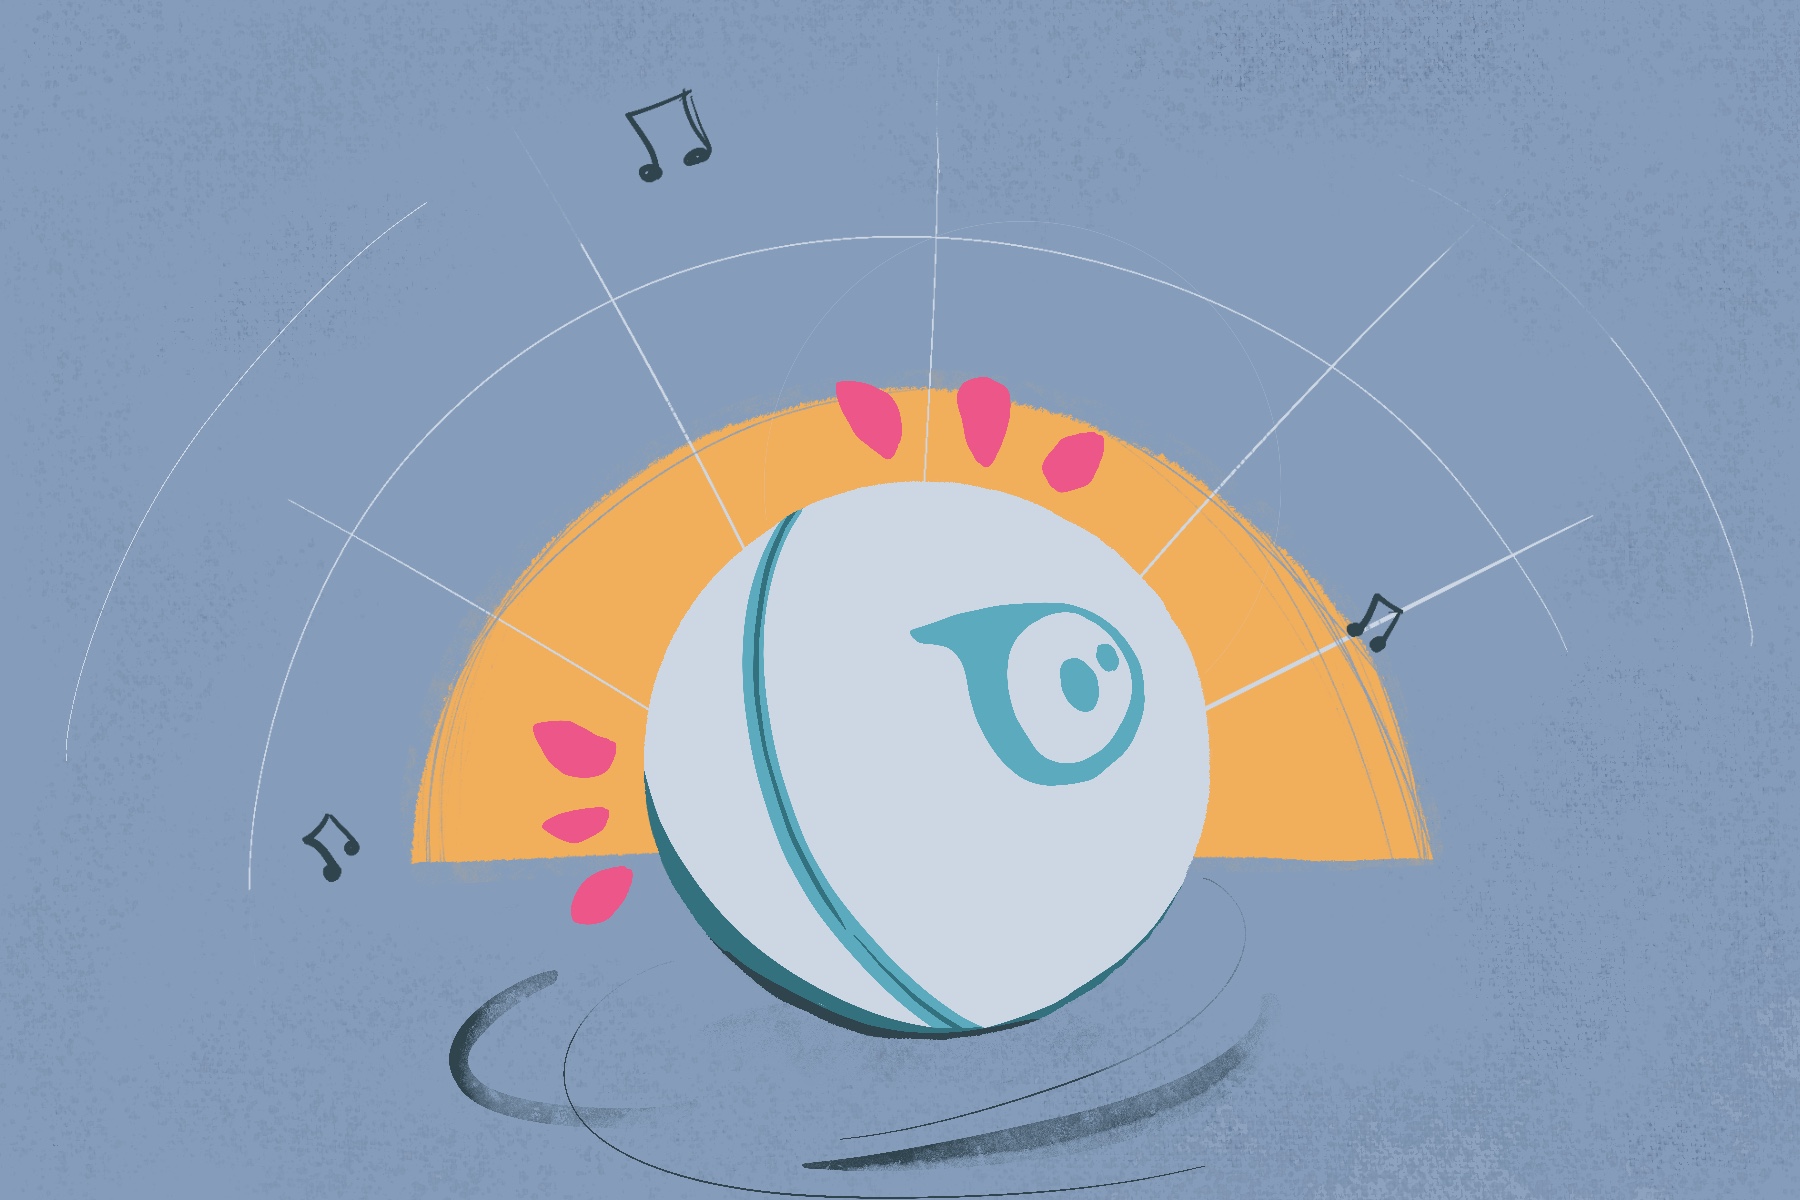 Illustration of Sphero in front of top half of a yellow semi-circle with music notes around